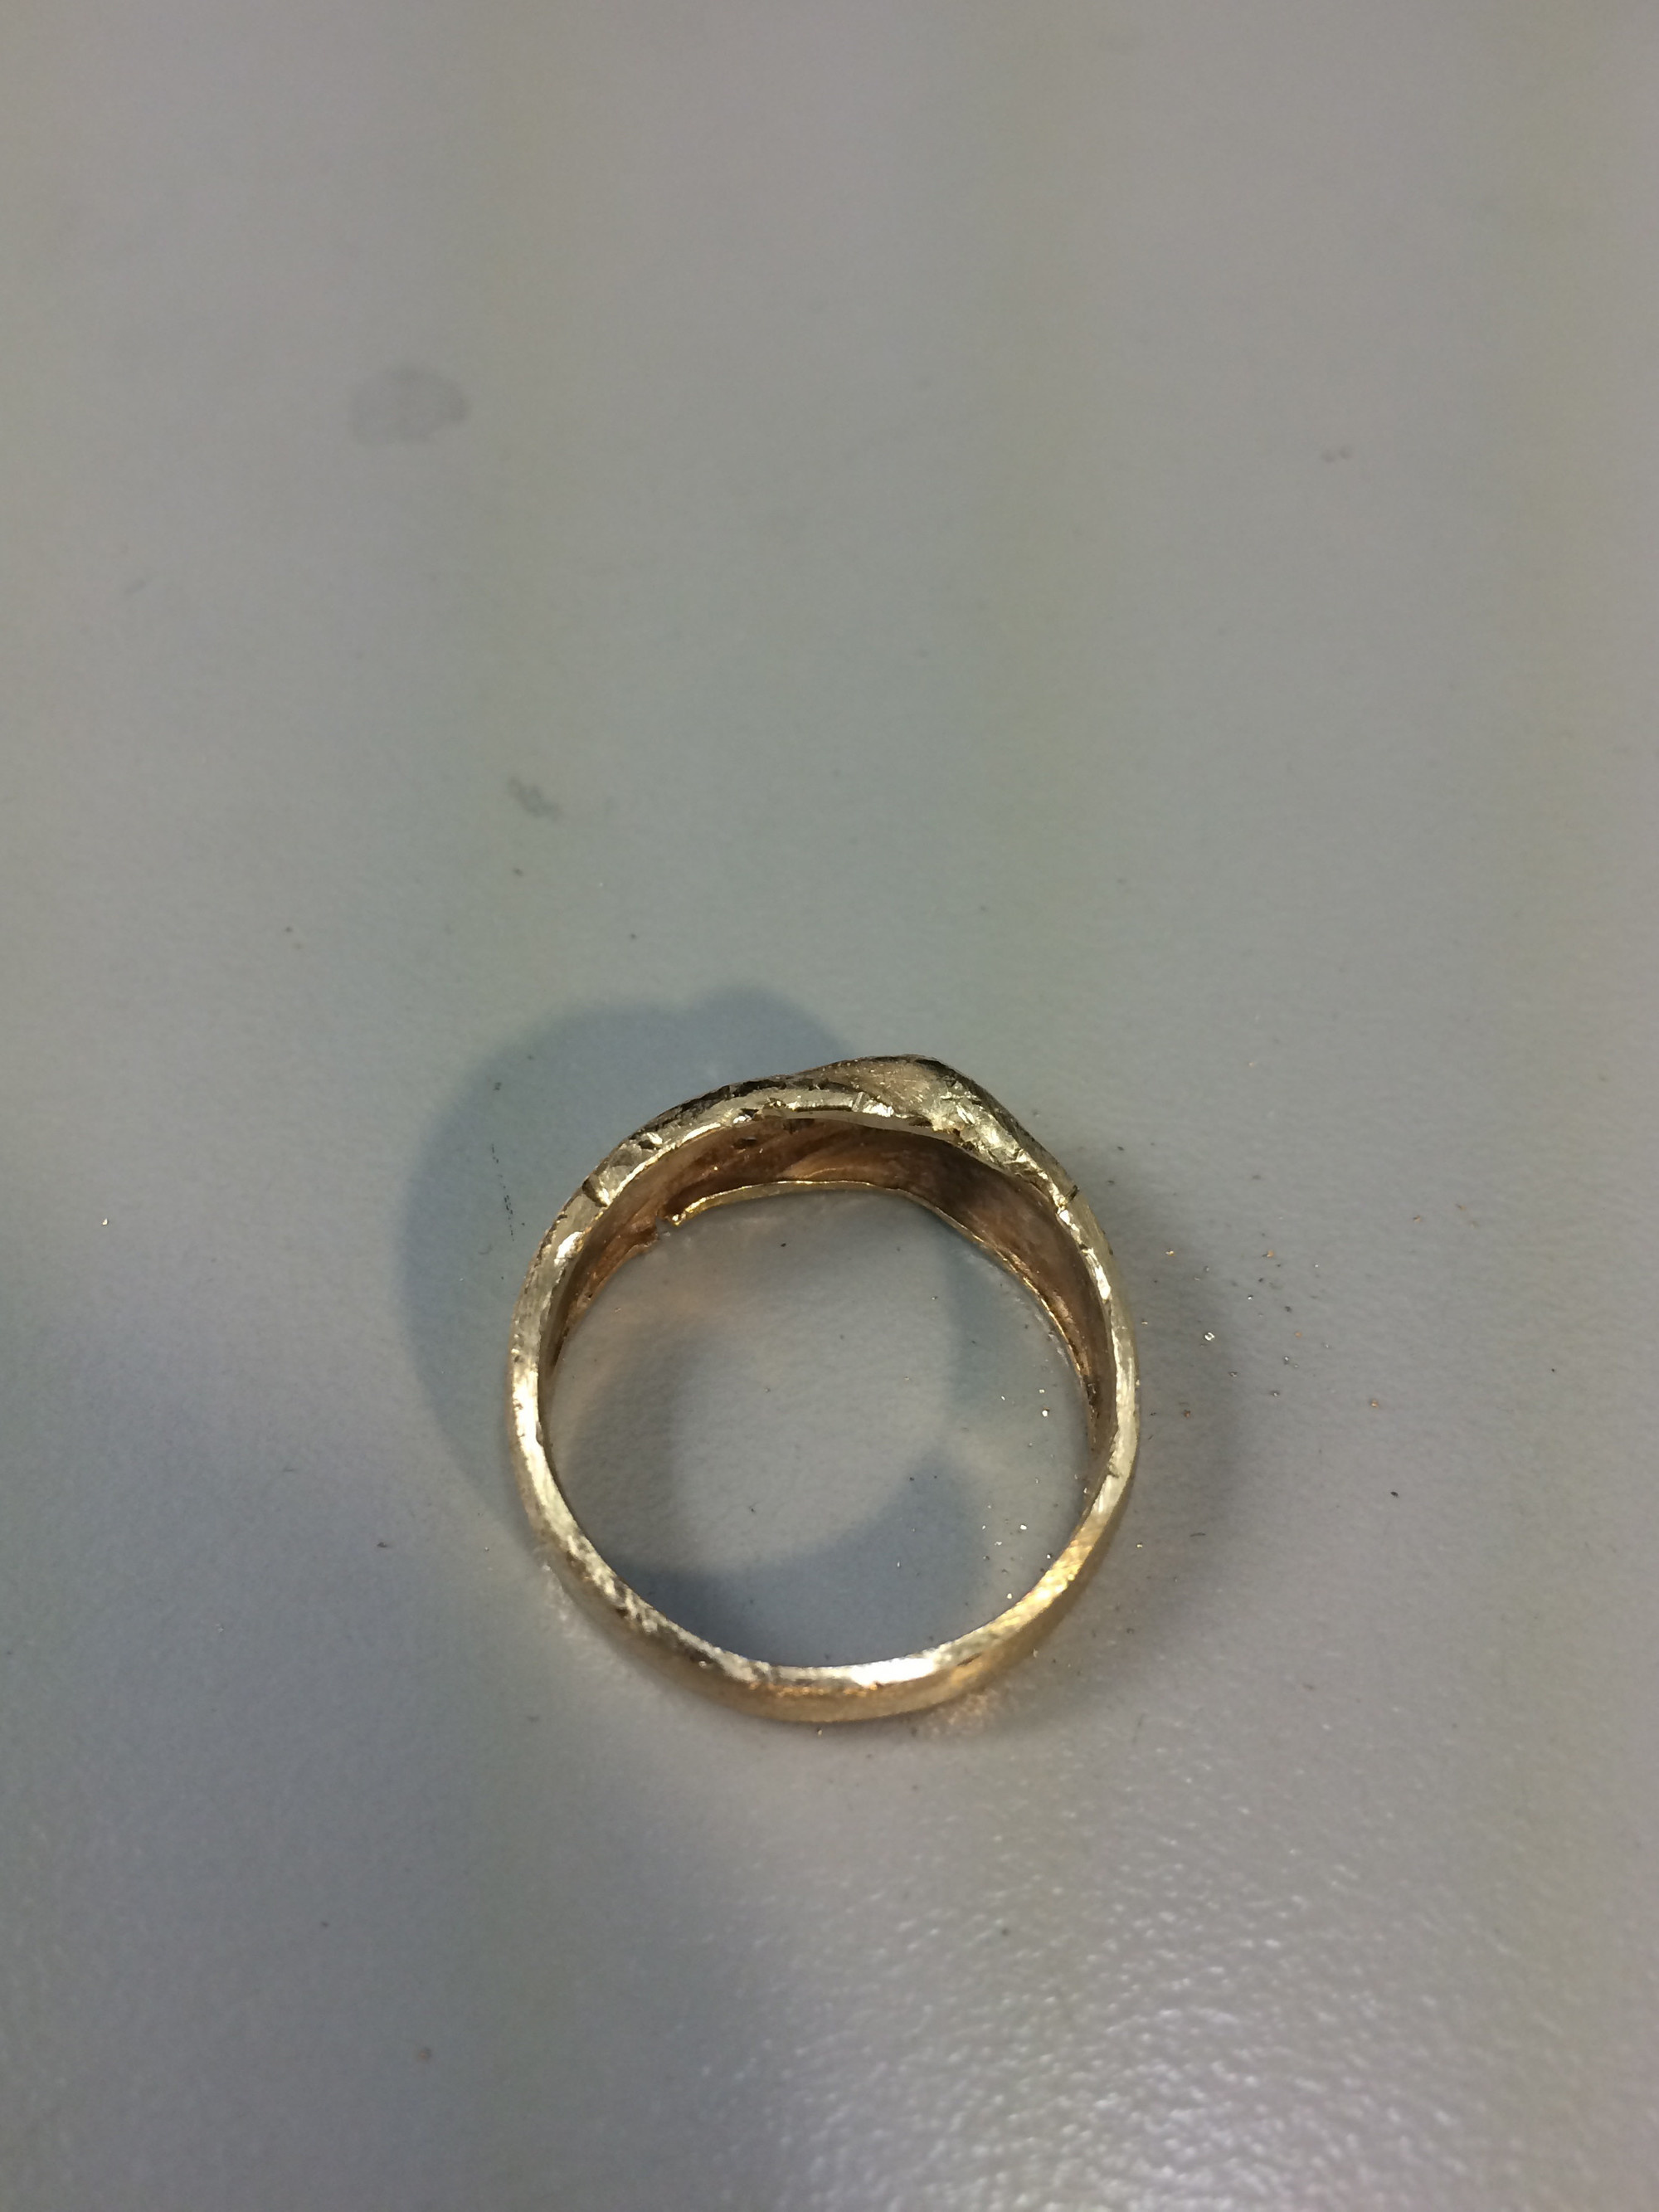 This step can remove a lot of gold from the ring, so he was careful to focus on filing and refurbishing only the mild scratches.